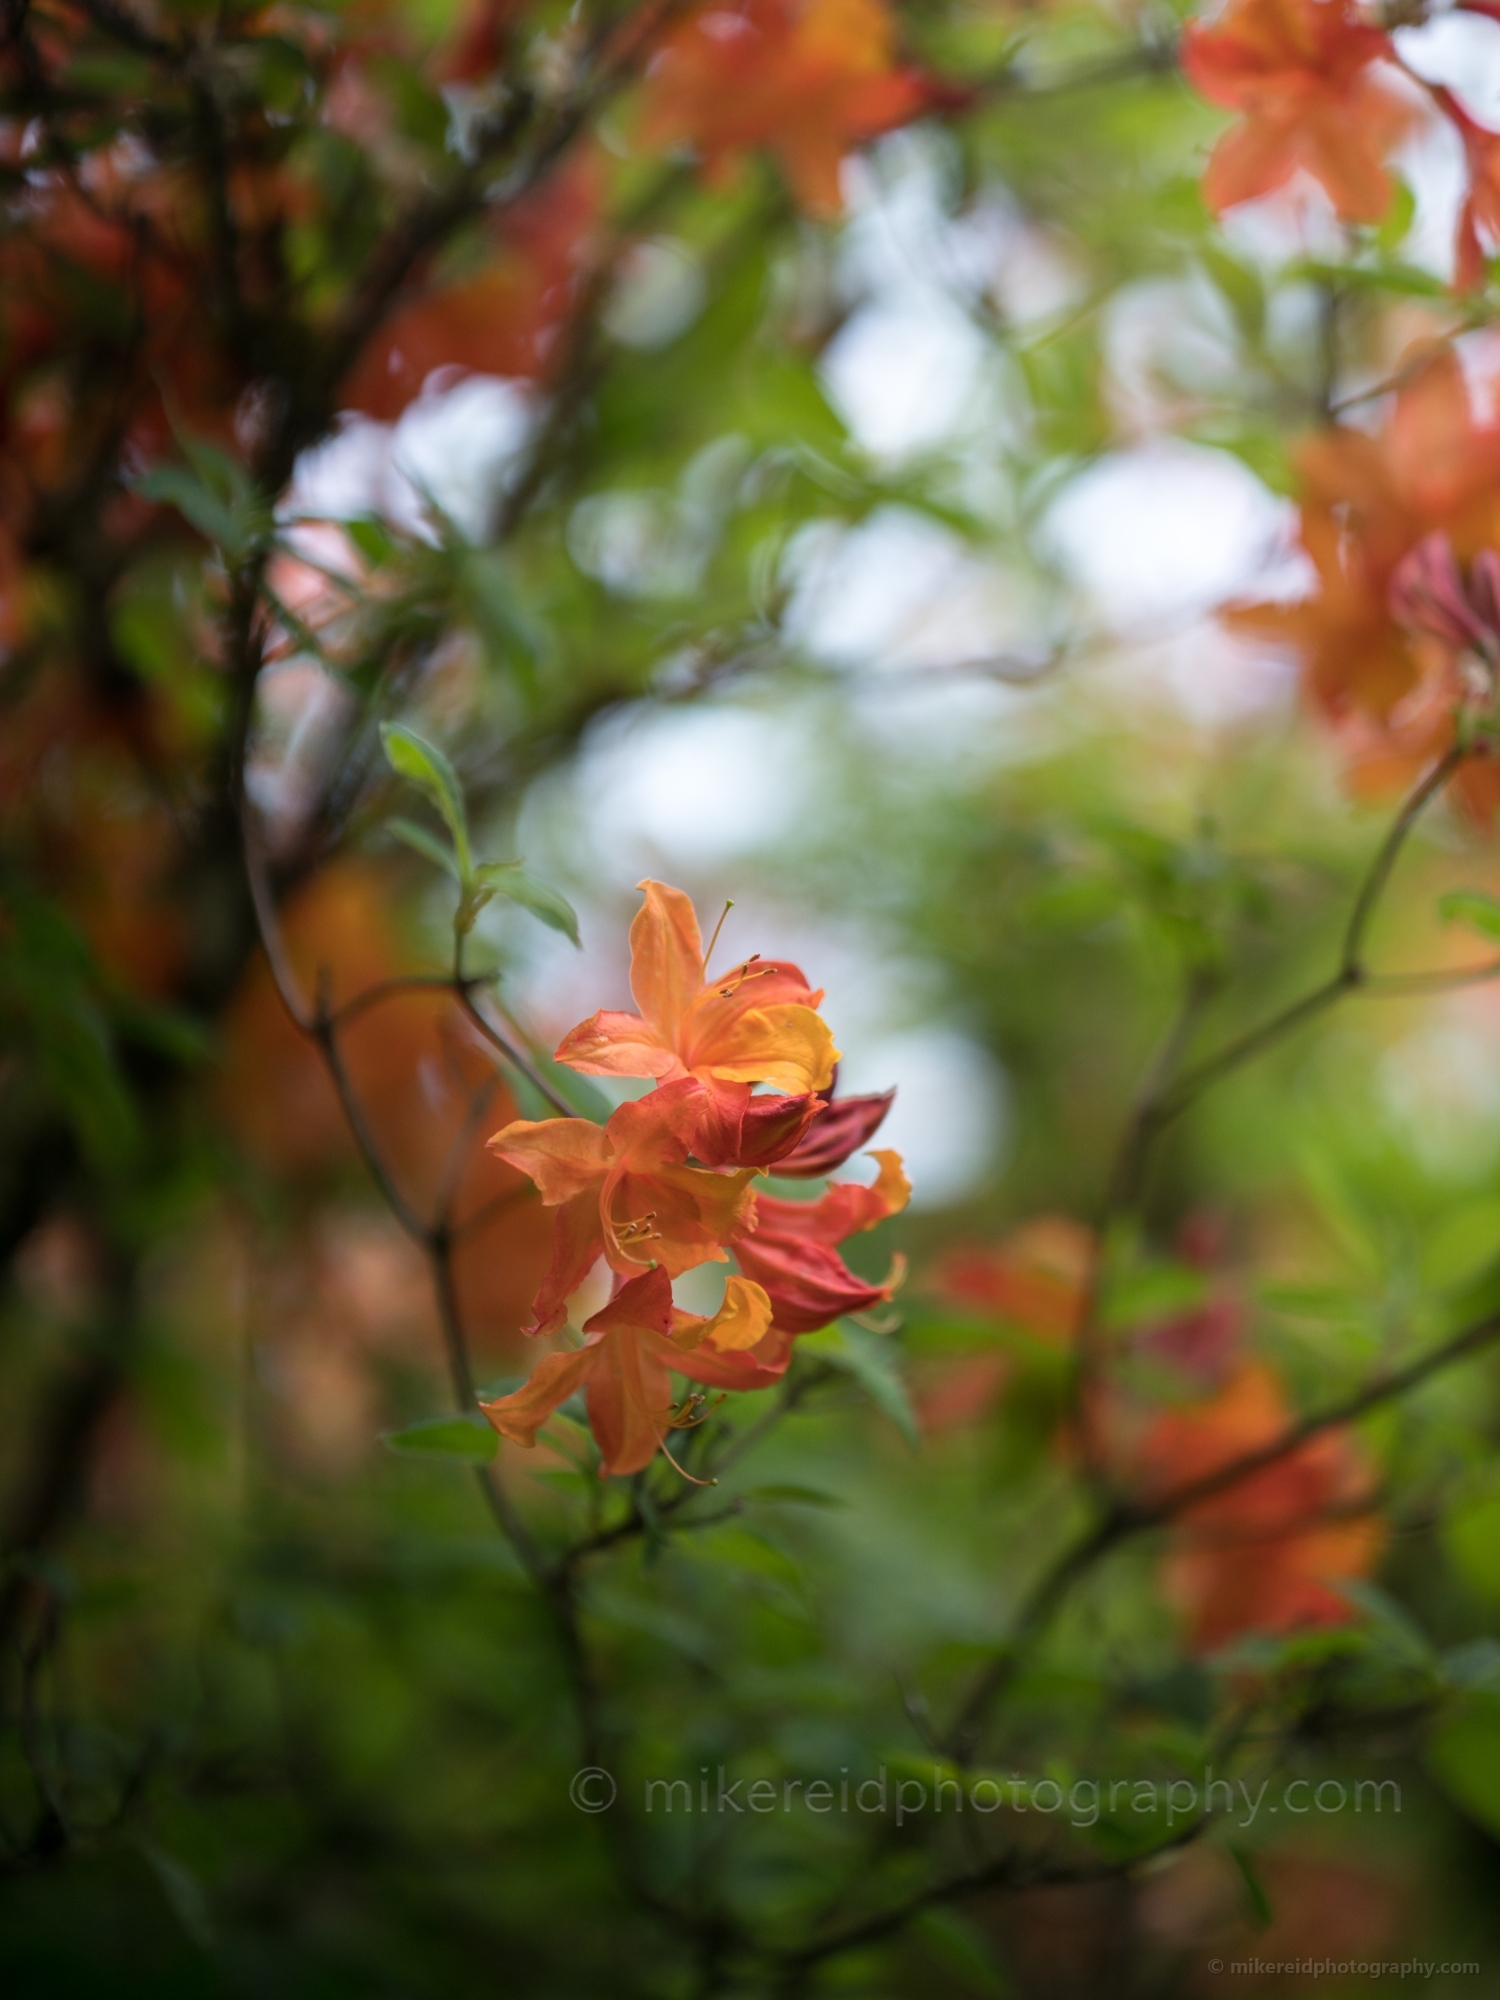 Rhododendron and Azaleas Photography Orange Blossoms and Branches.jpg 